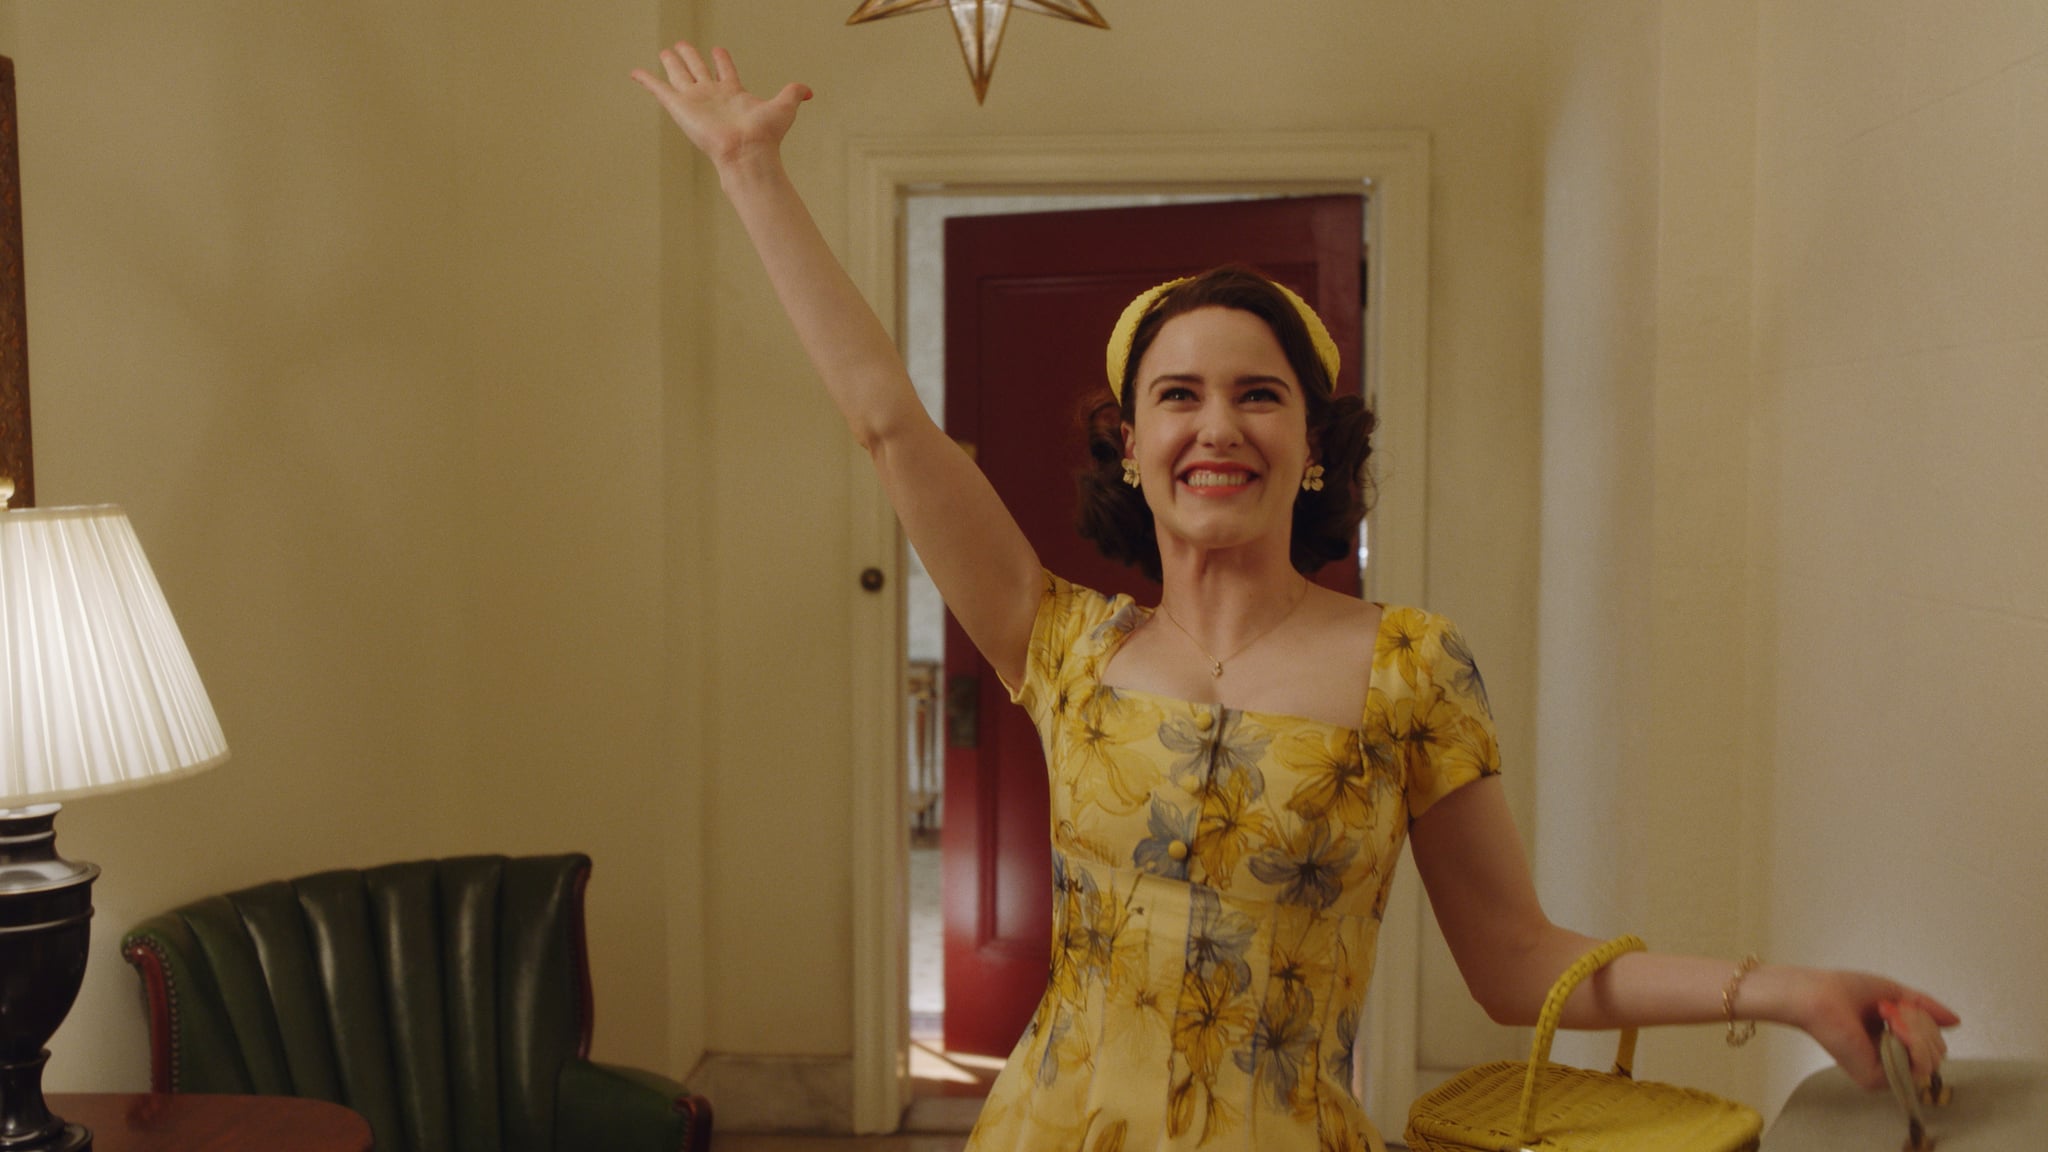 THE MARVELOUS MRS. MAISEL, Rachel Brosnahan, 'We're Going To The Catskills!', (Season 2, ep. 204, aired Dec. 5, 2018). photo: Amazon / Courtesy: Everett Collection